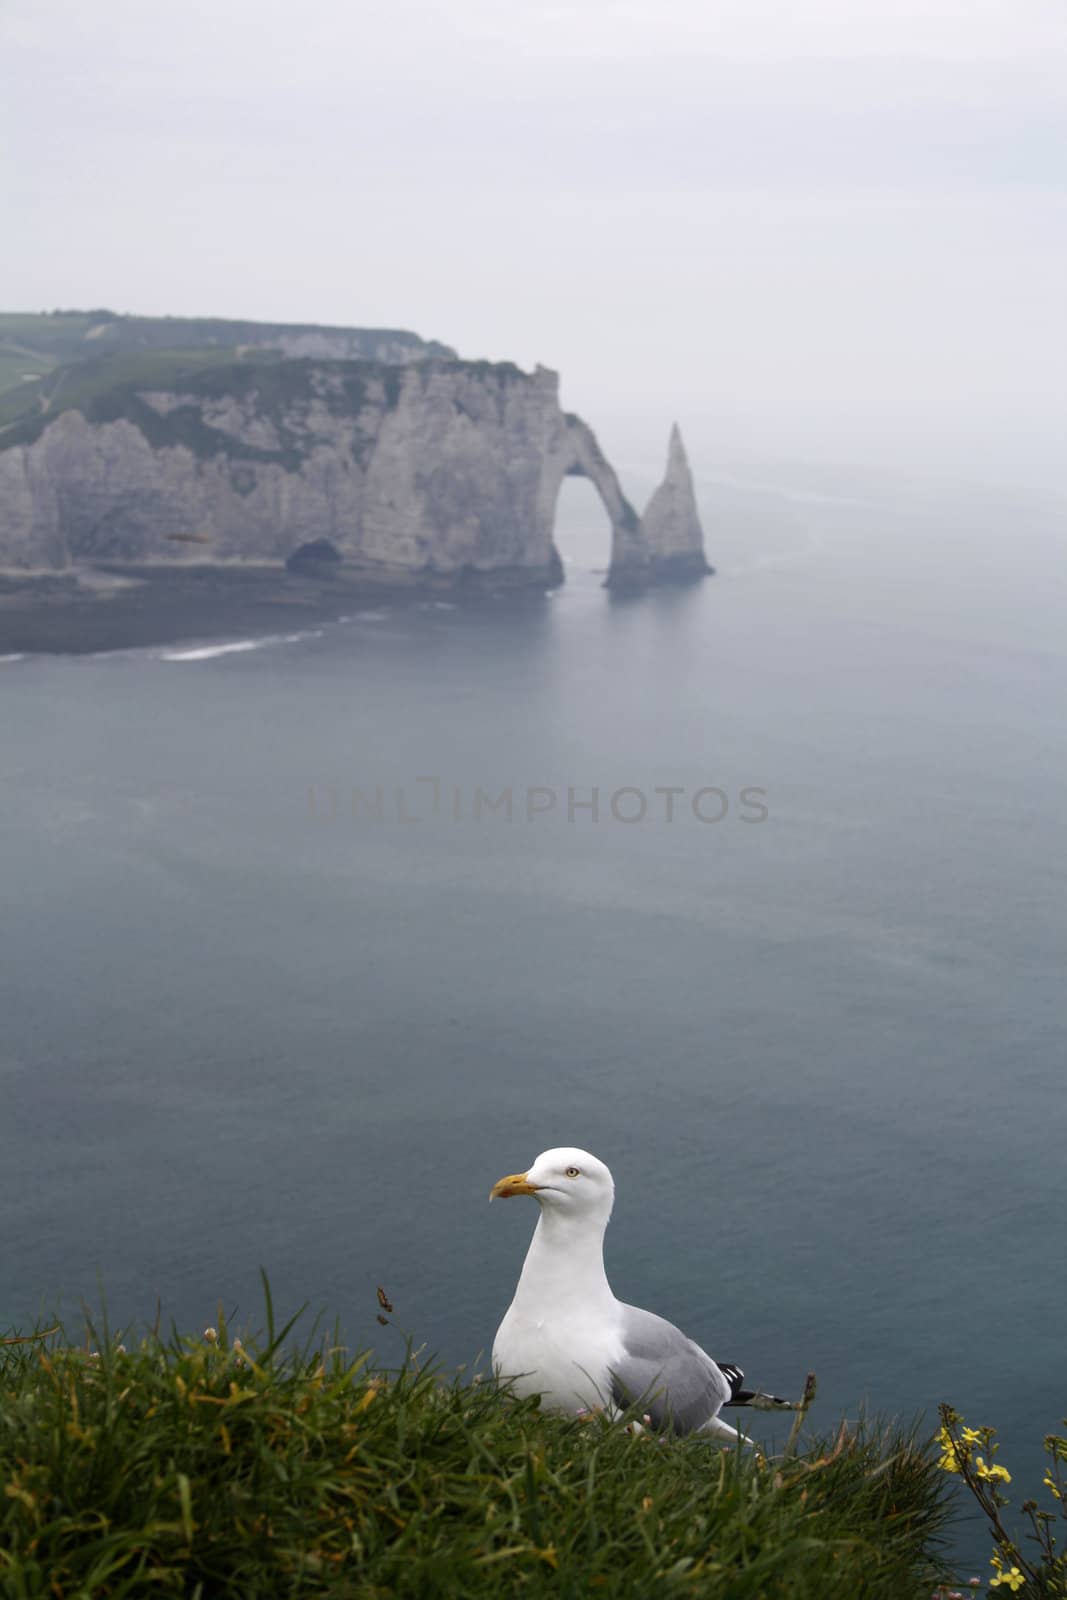 A seagull on the falaise d'Amont with falaise d'Aval and l'Aiguille in the distance.